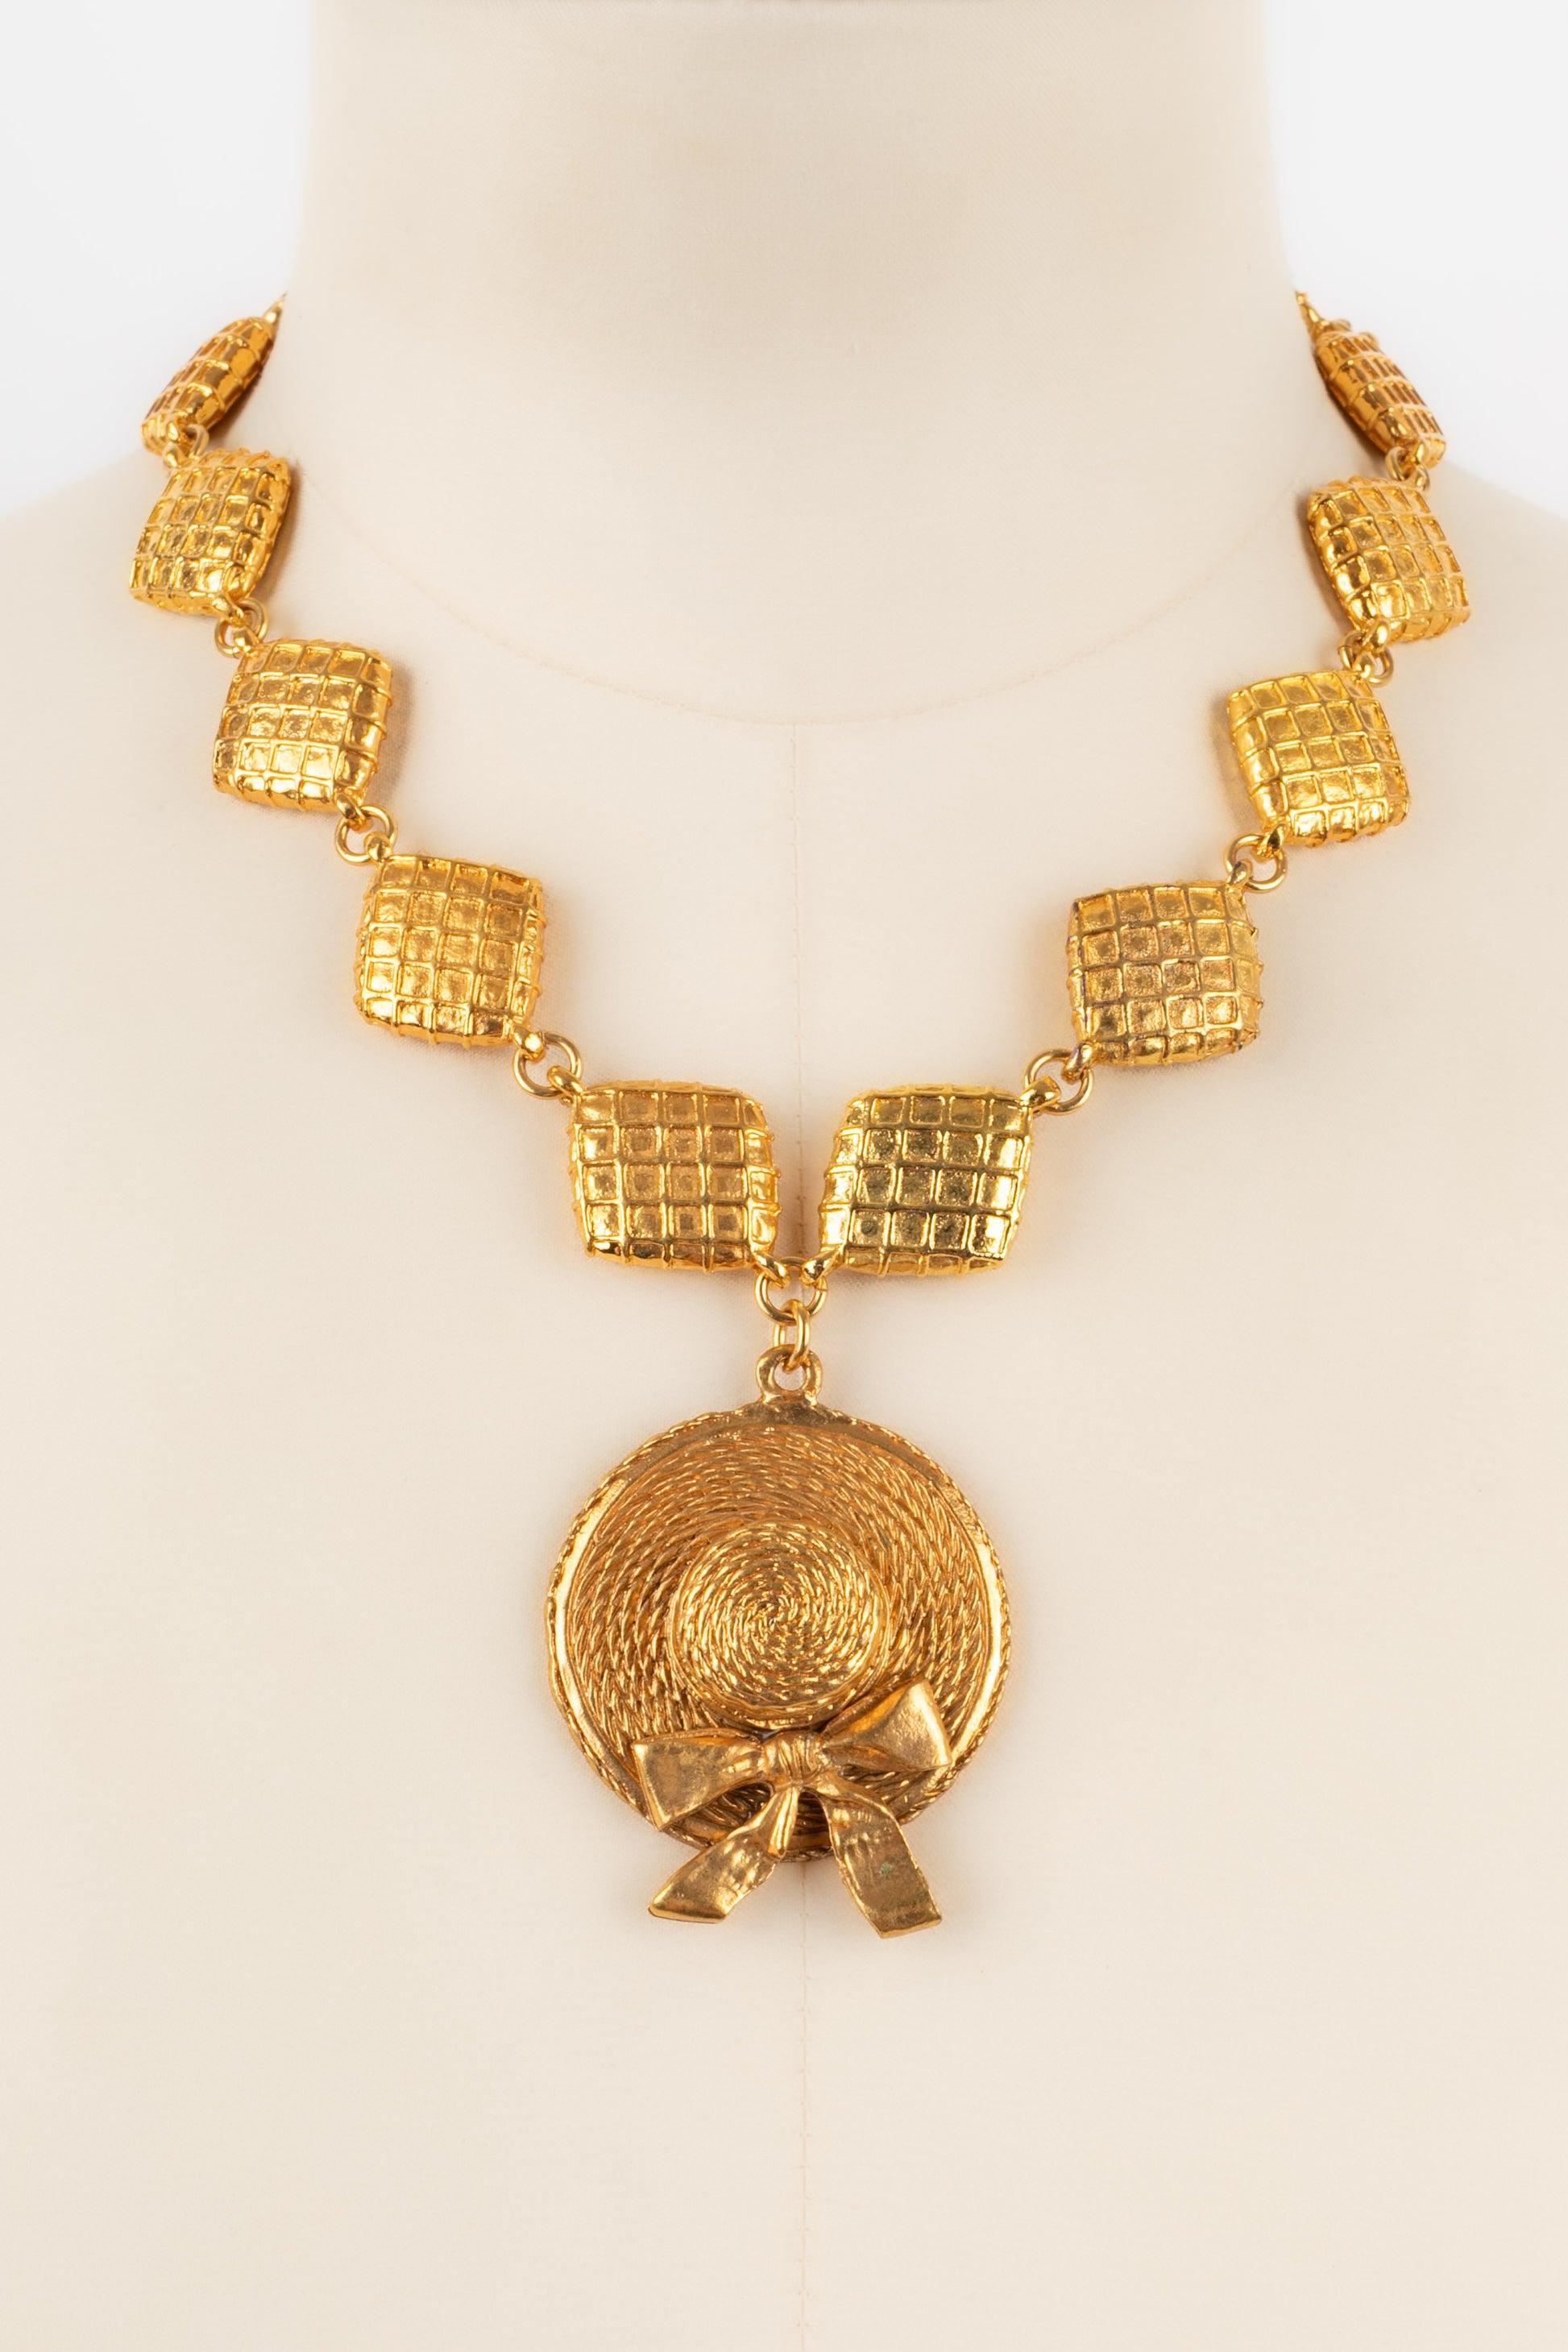 Chanel  Necklace in Golden Metal with Quilted Elements, 1990s In Excellent Condition For Sale In SAINT-OUEN-SUR-SEINE, FR